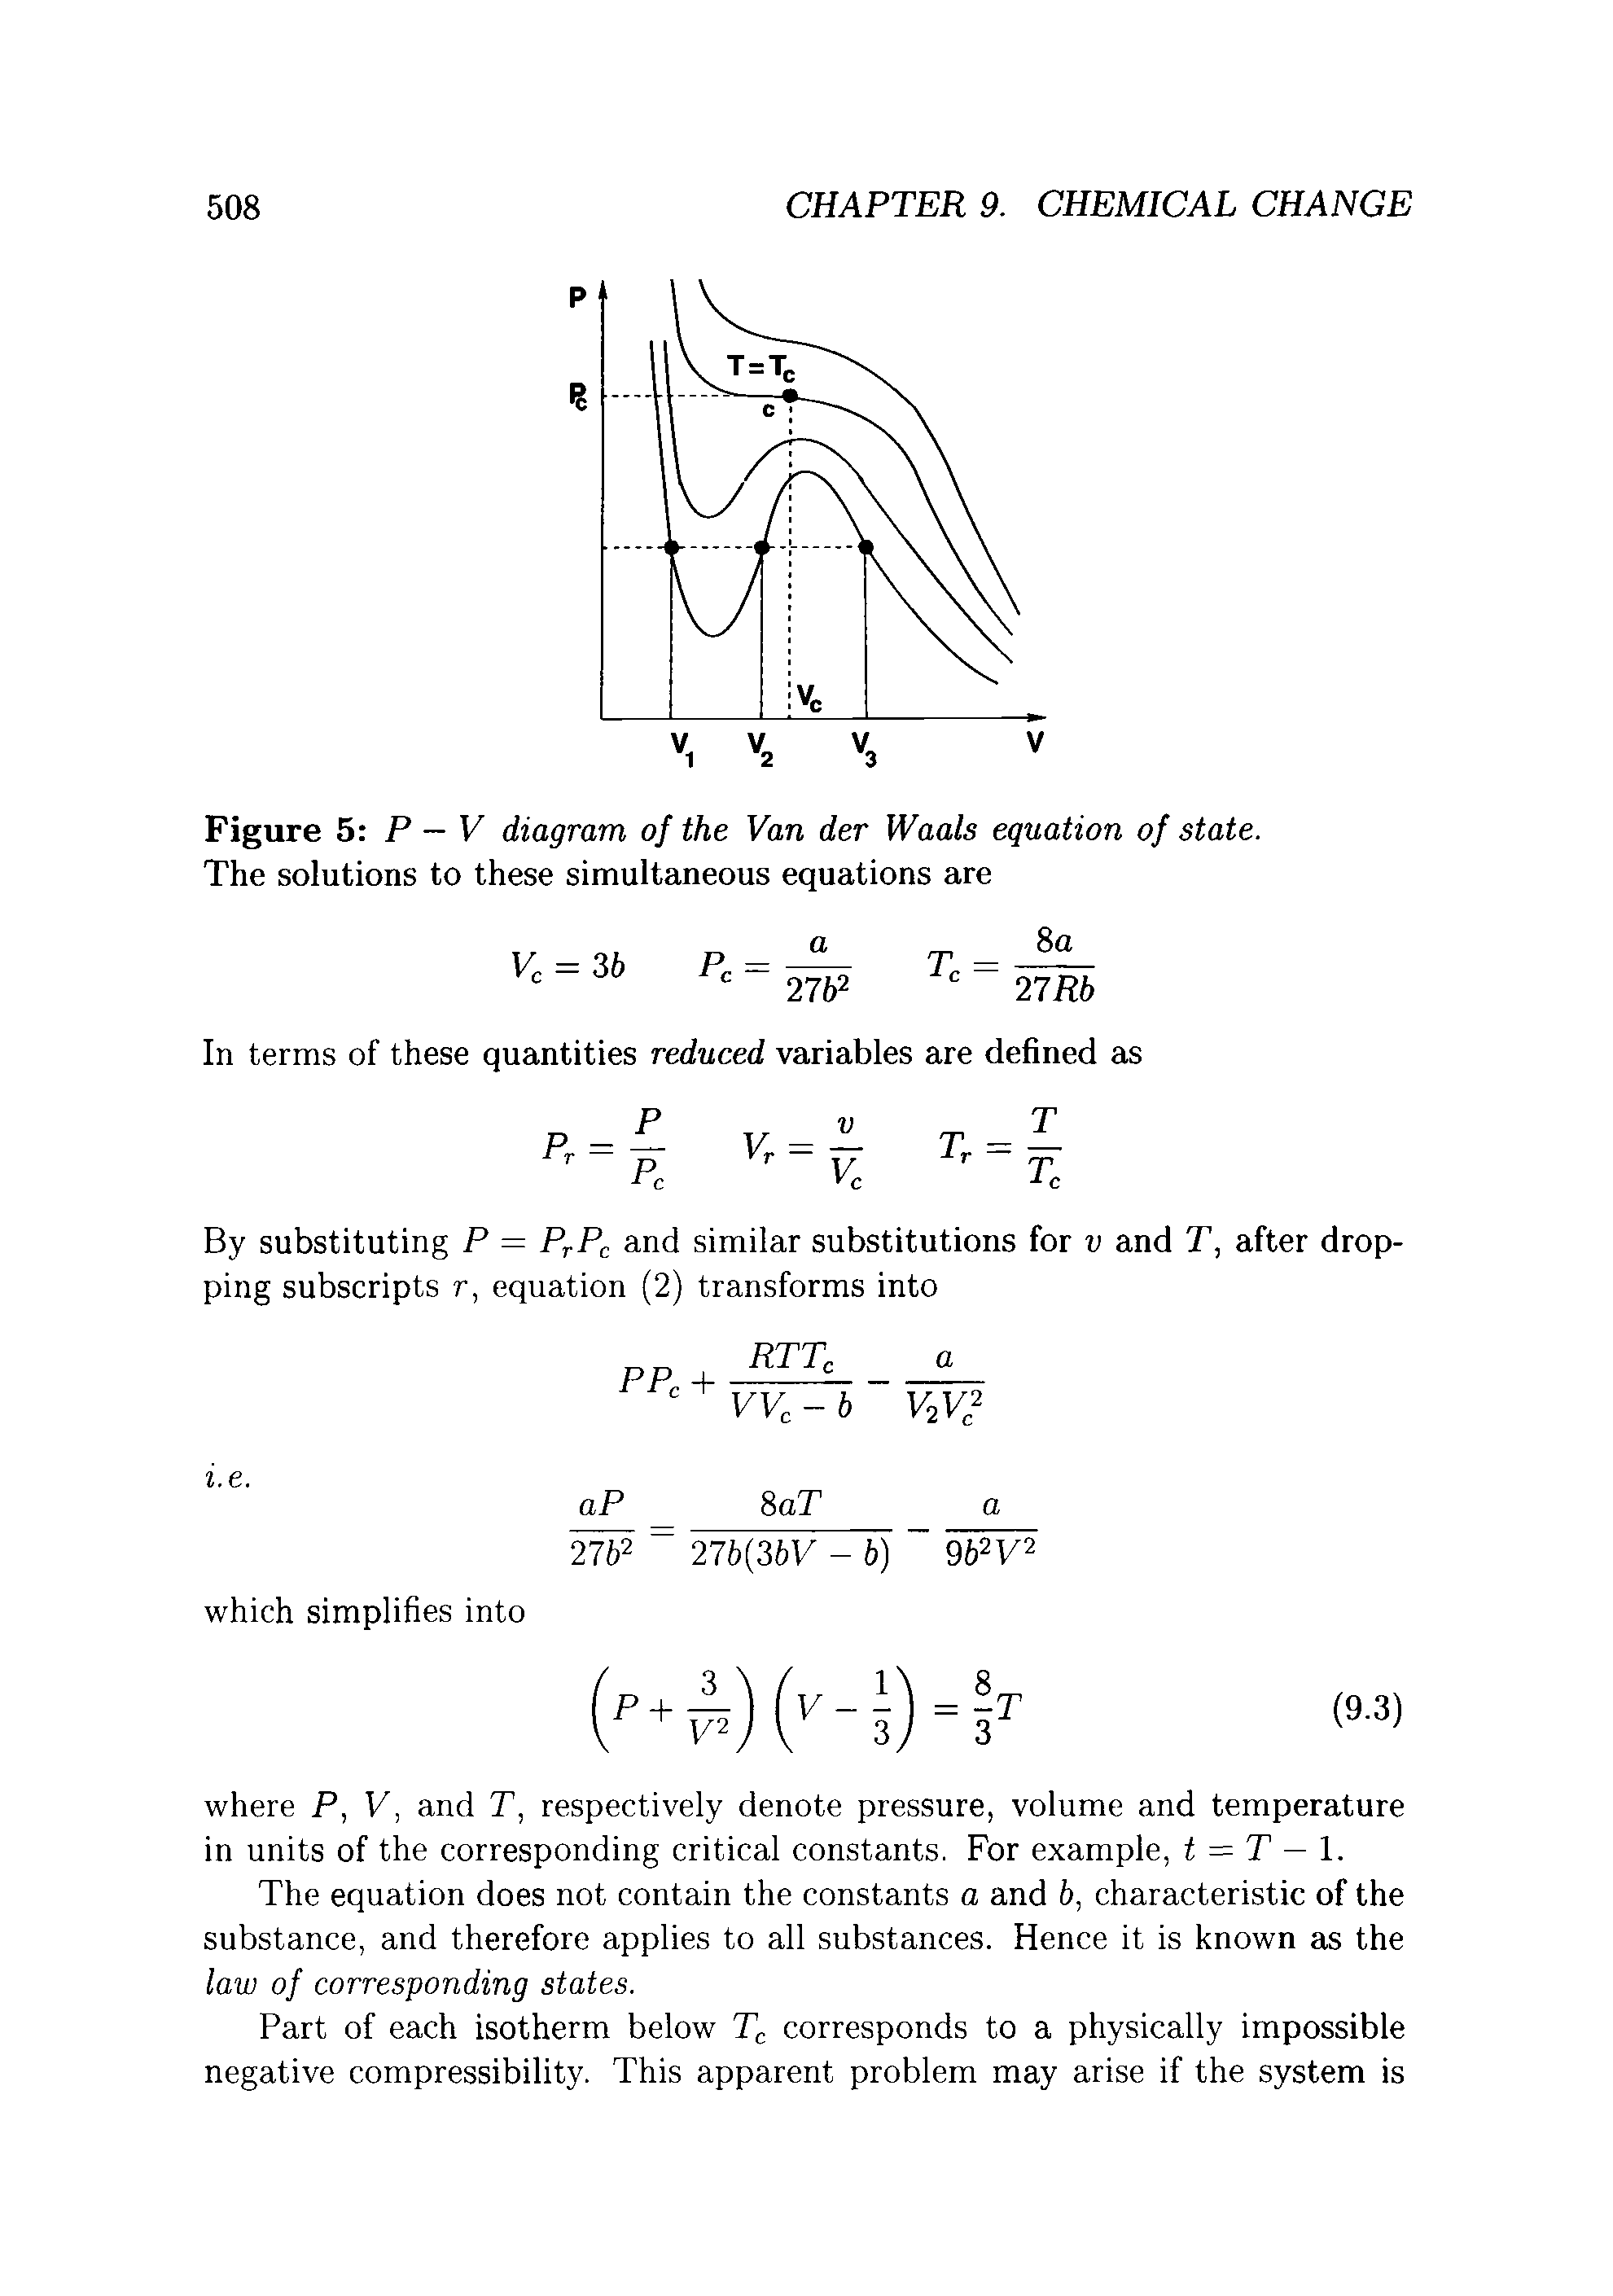 Figure 5 P — V diagram of the Van der Waals equation of state. The solutions to these simultaneous equations are...